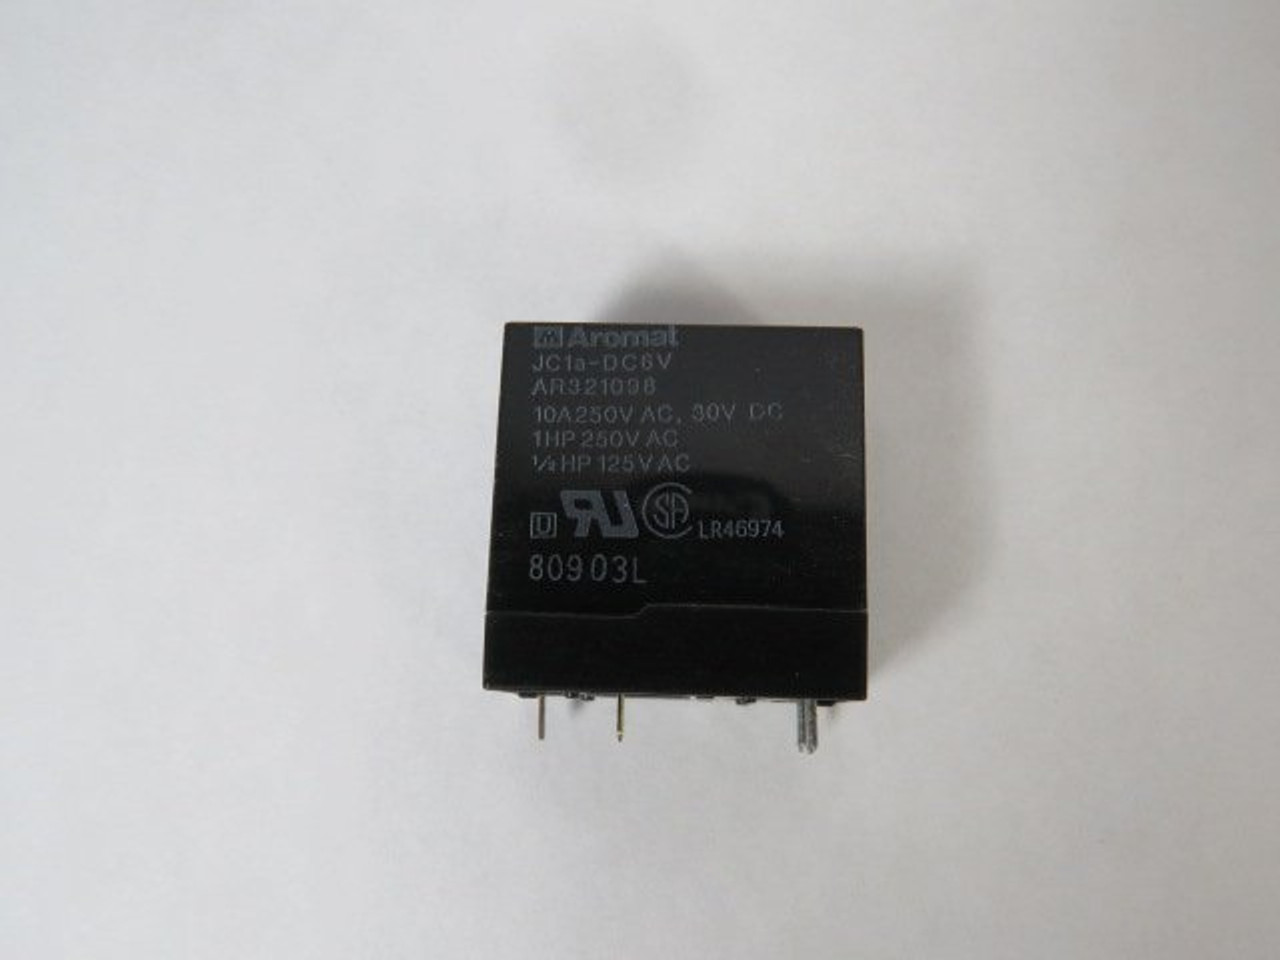 Aromat JC1A-DC6V Relay 6VDC 10A USED